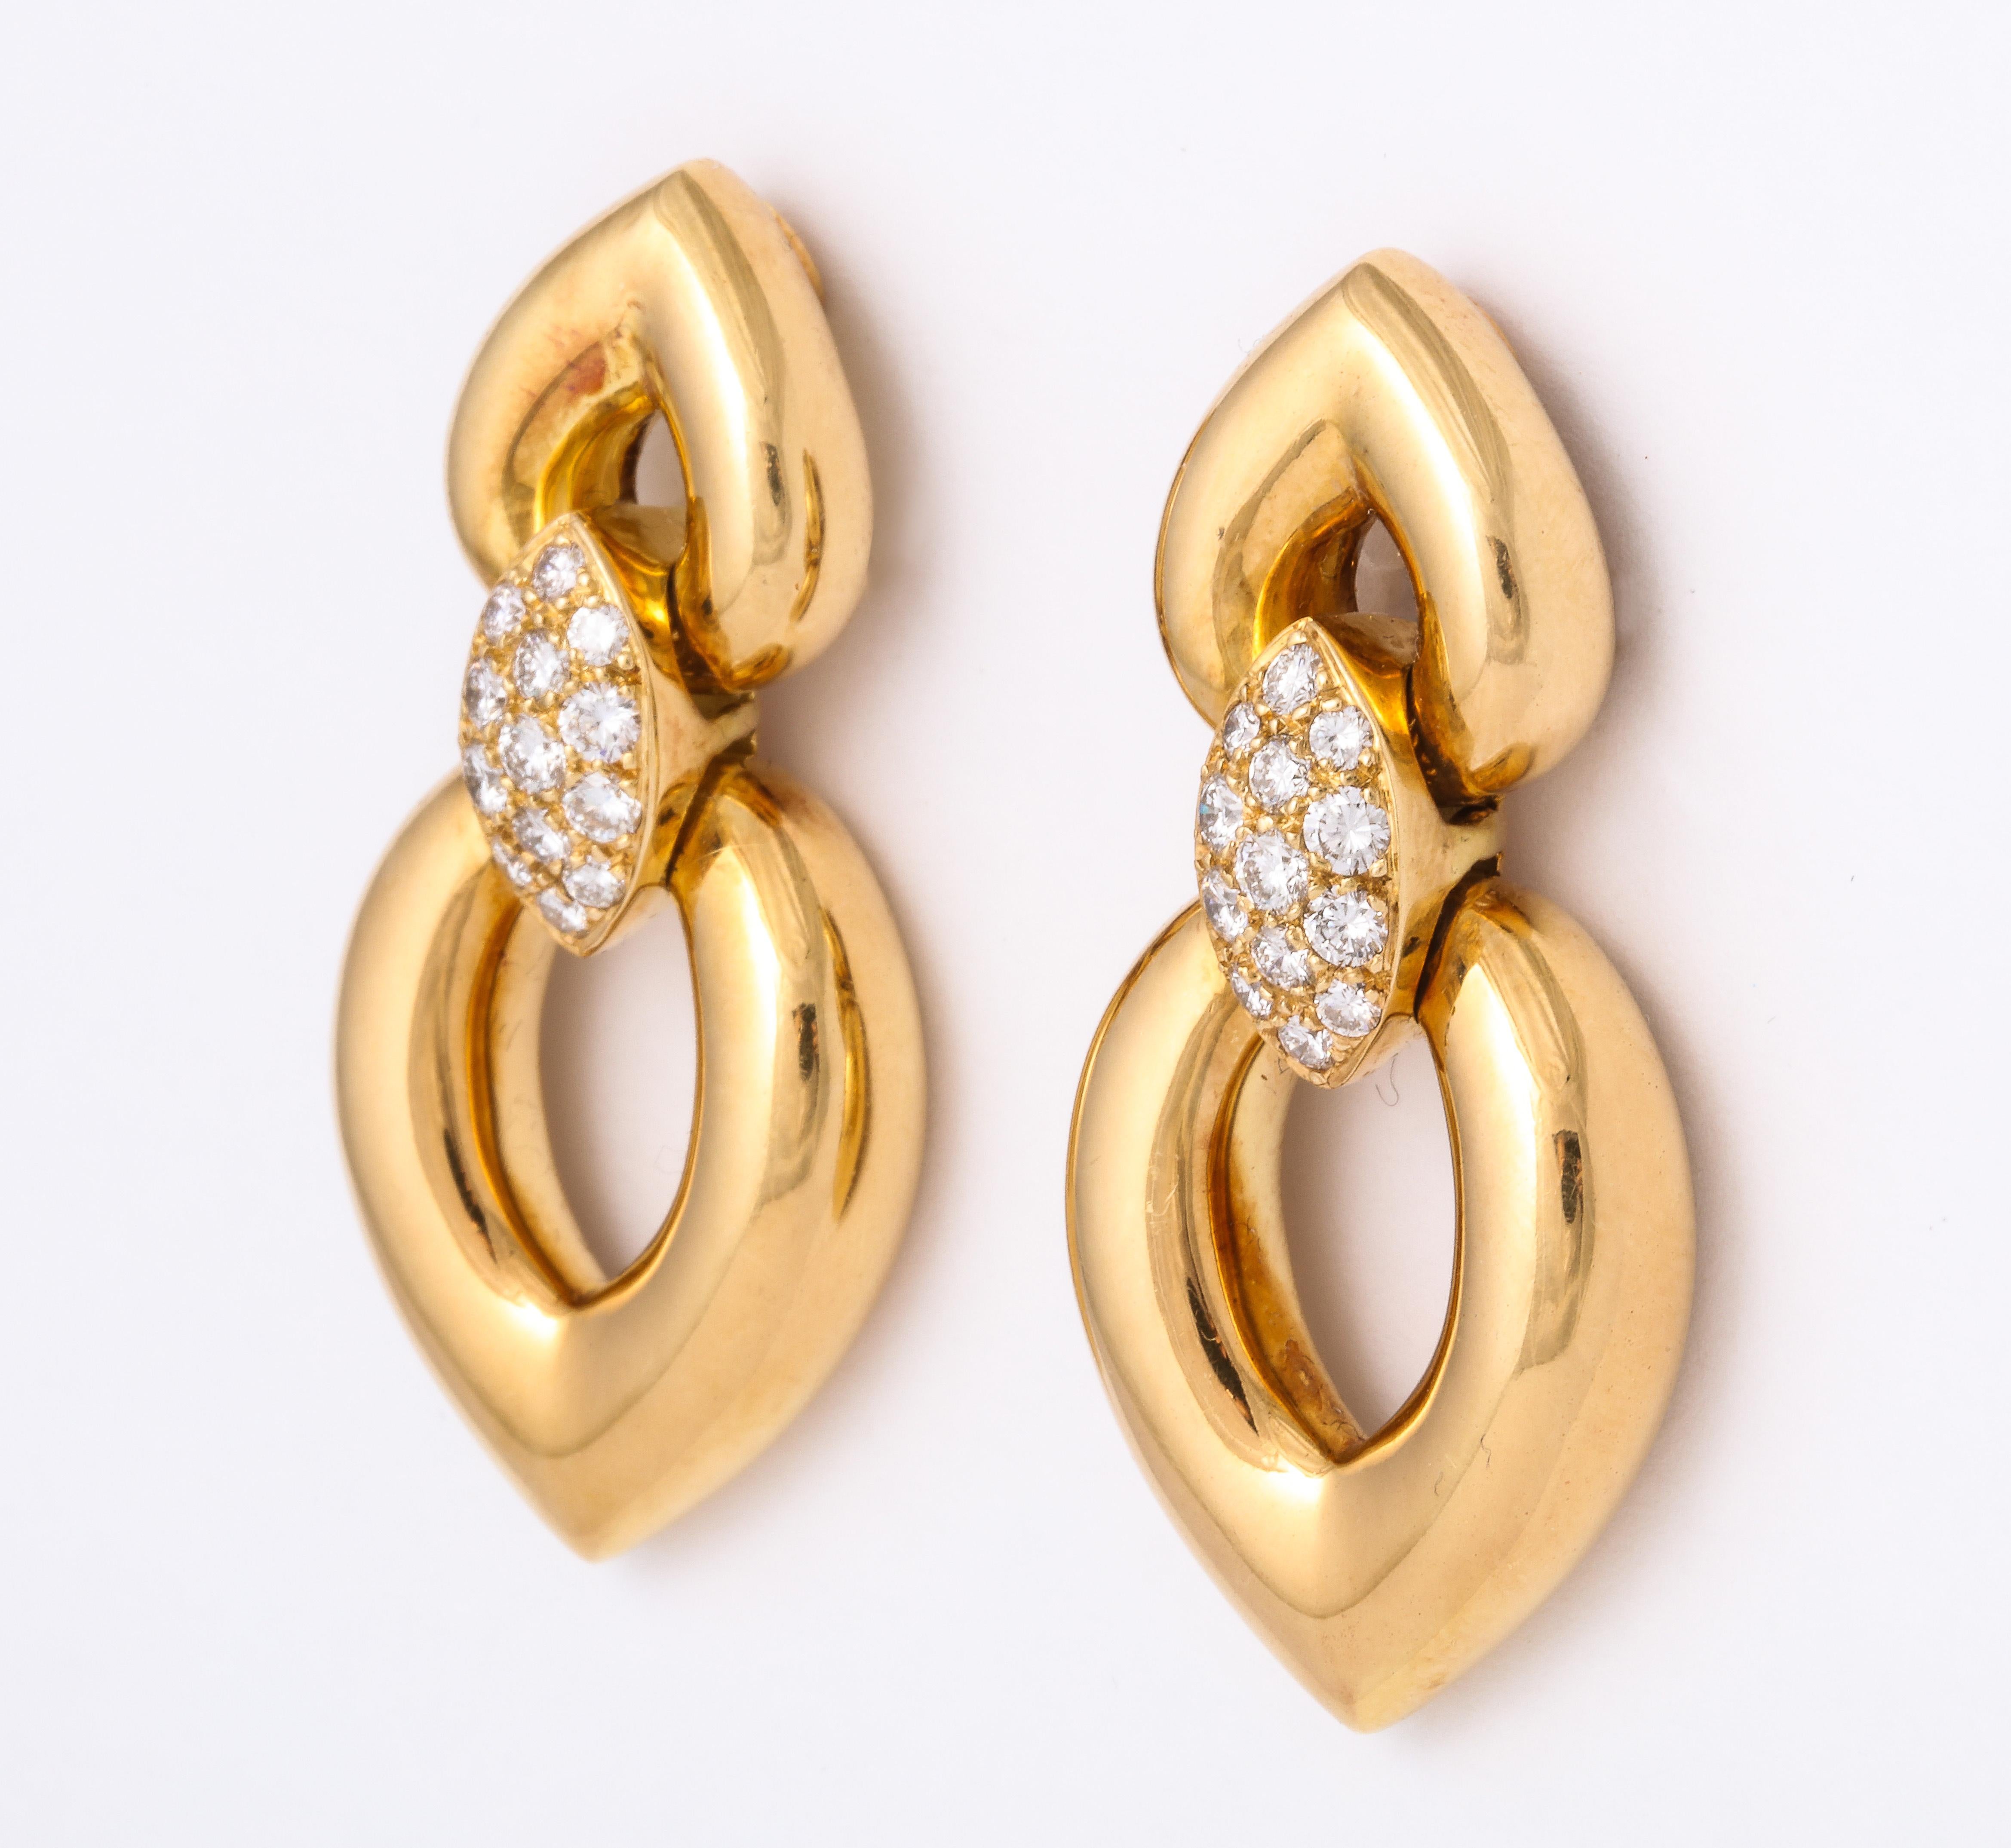 Van Cleef & Arpels Diamond Yellow Gold Clip On Earrings. 18K Yellow Gold, 31 grams. 26 full cut white diamonds approximately 1.75 cts tw. Marked VCA. 750. B3493A77. 2